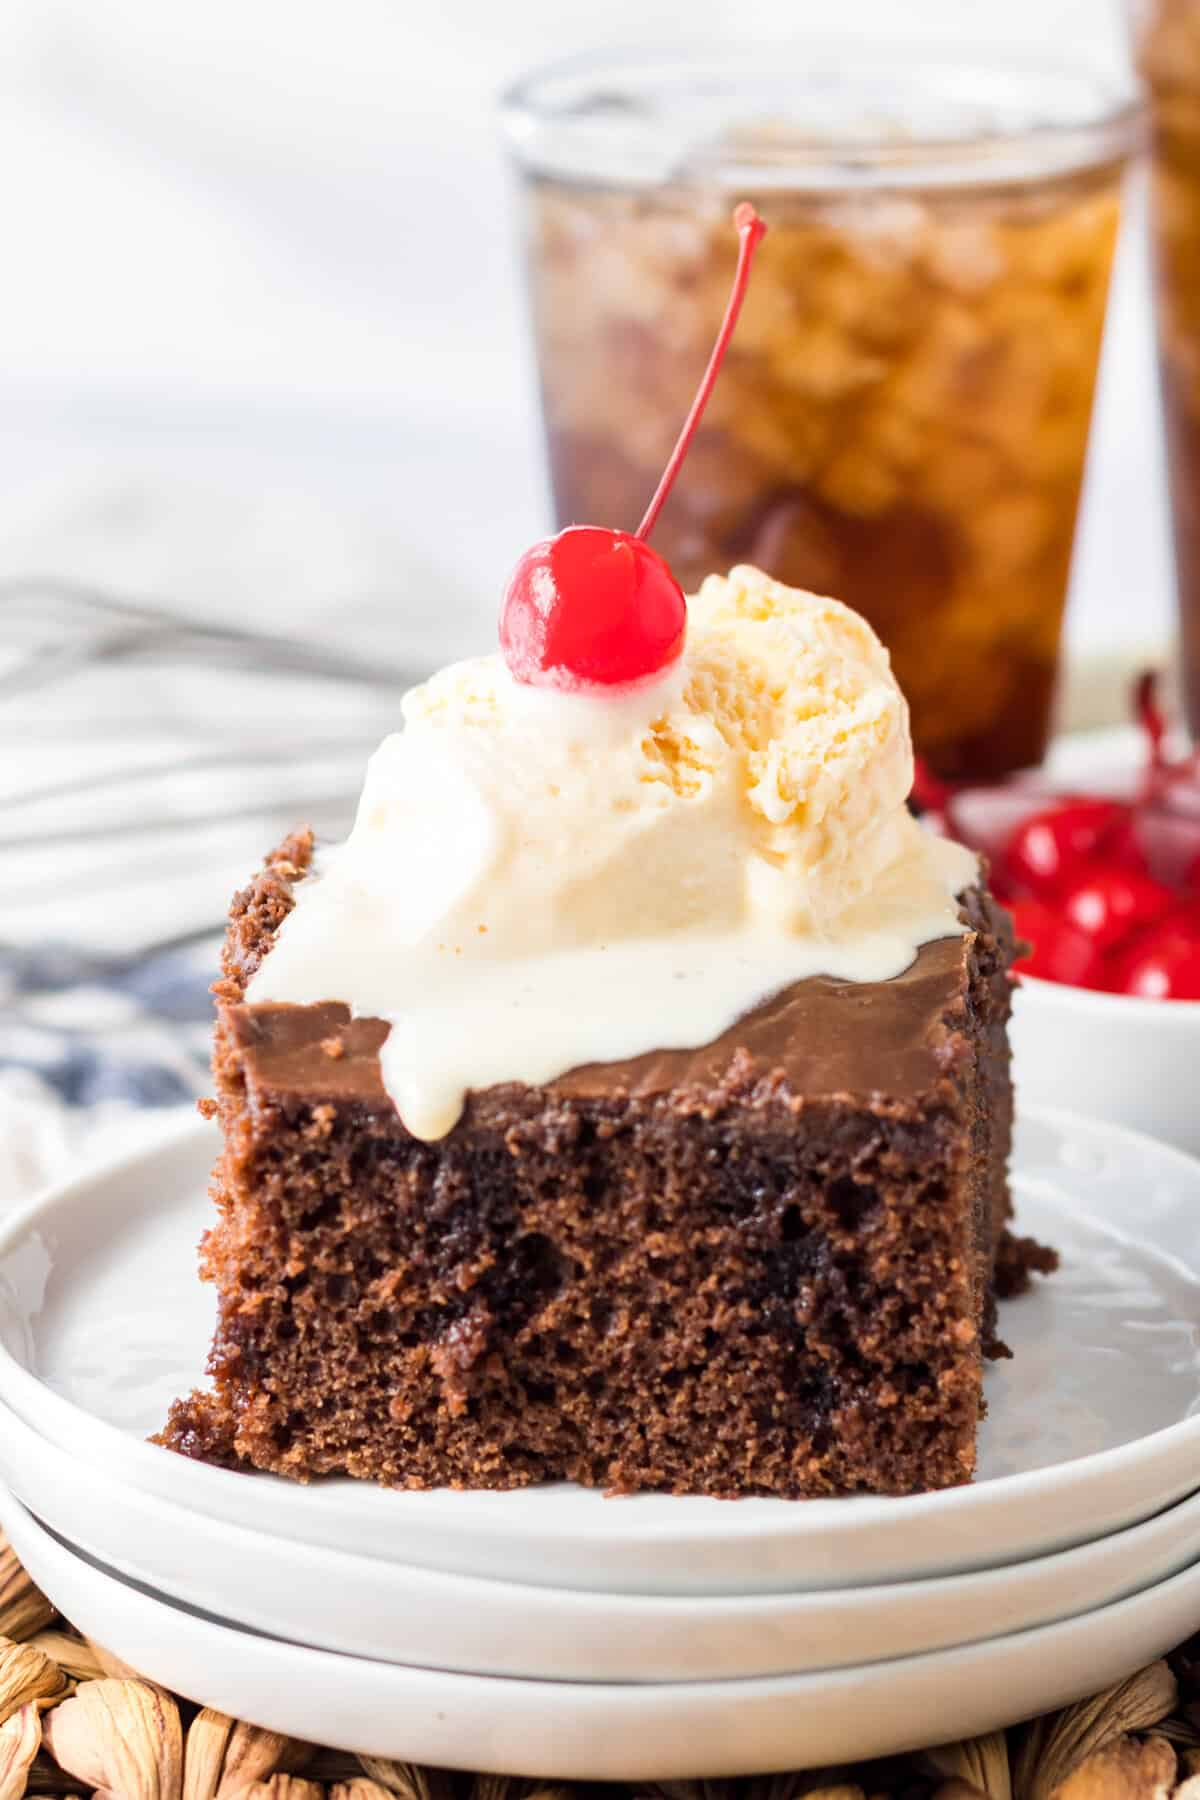 Piece of double chocolate Coca-Cola cake topped with a scoop of vanilla ice cream and a cherry. A glass of soda is behind the cake.